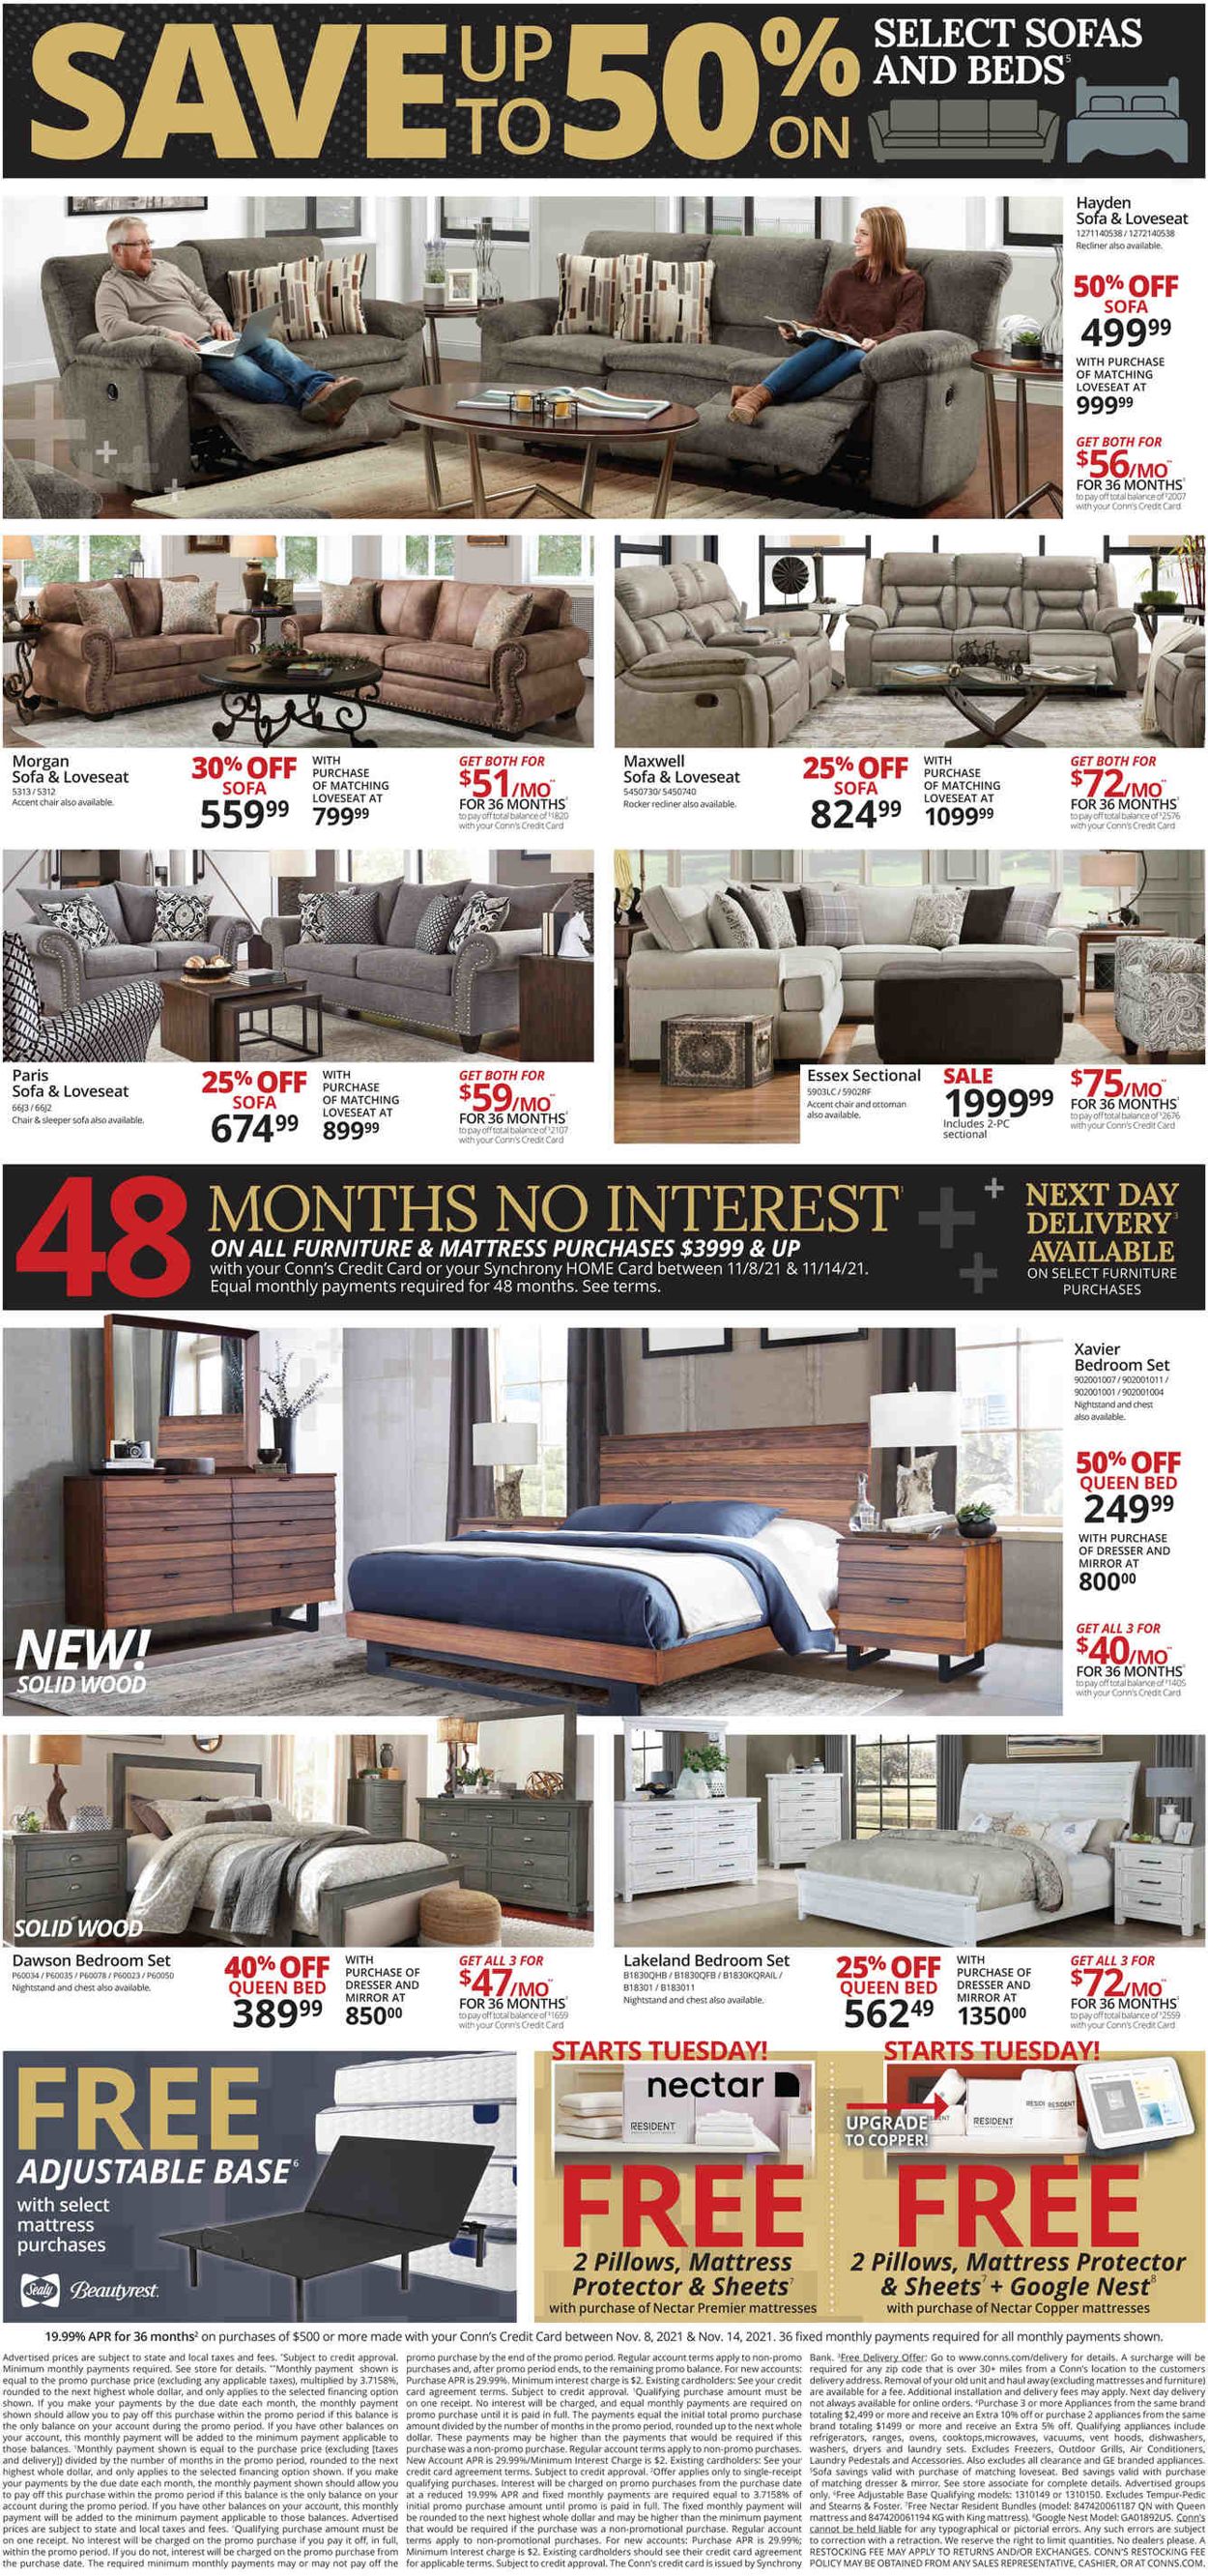 Conn's Home Plus BLACK FRIDAY 2021 Weekly Ad Circular - valid 11/08-11/14/2021 (Page 2)